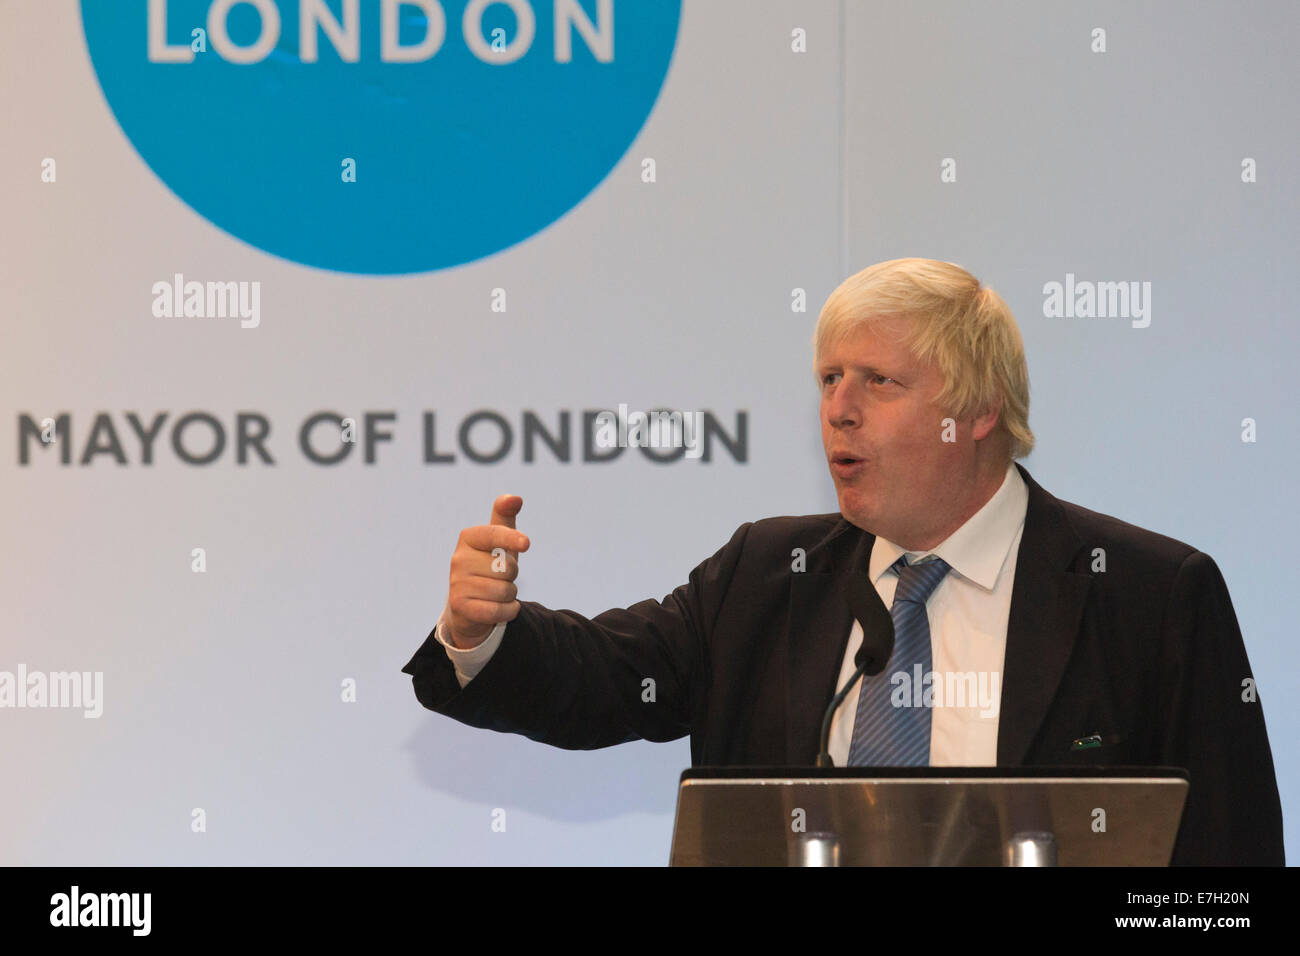 London, UK. 17 September 2014. London Mayor Boris Johnson. Team London 2014 Awards at City Hall, London, UK. The annual event recognises the contribution that London volunteers are making to communities across the capital. Credit:  Nick Savage/Alamy Live News Stock Photo